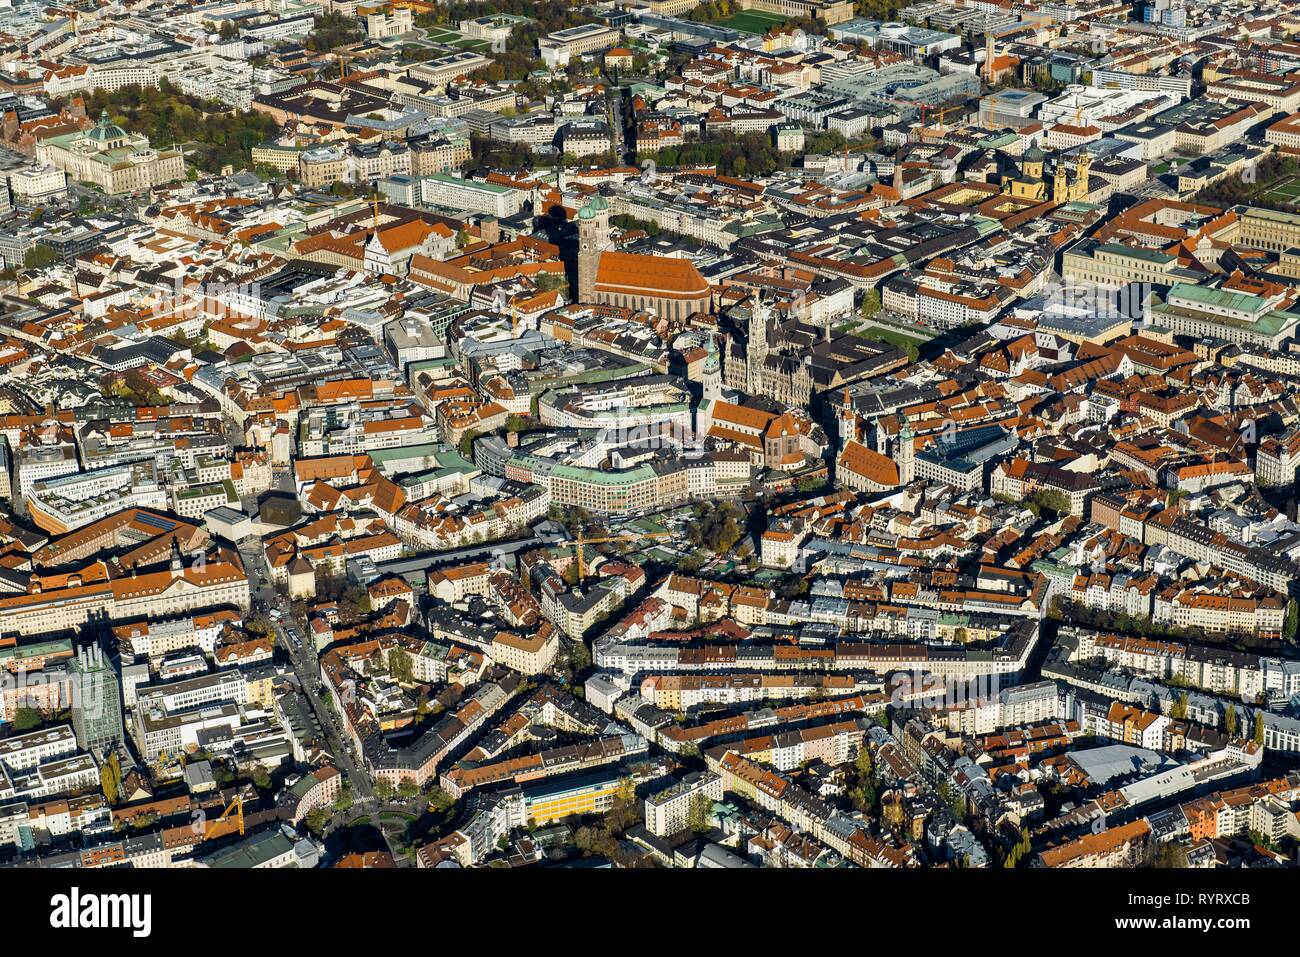 Aerial photo, view of city centre with old town, Munich, Upper Bavaria, Bavaria, Germany Stock Photo